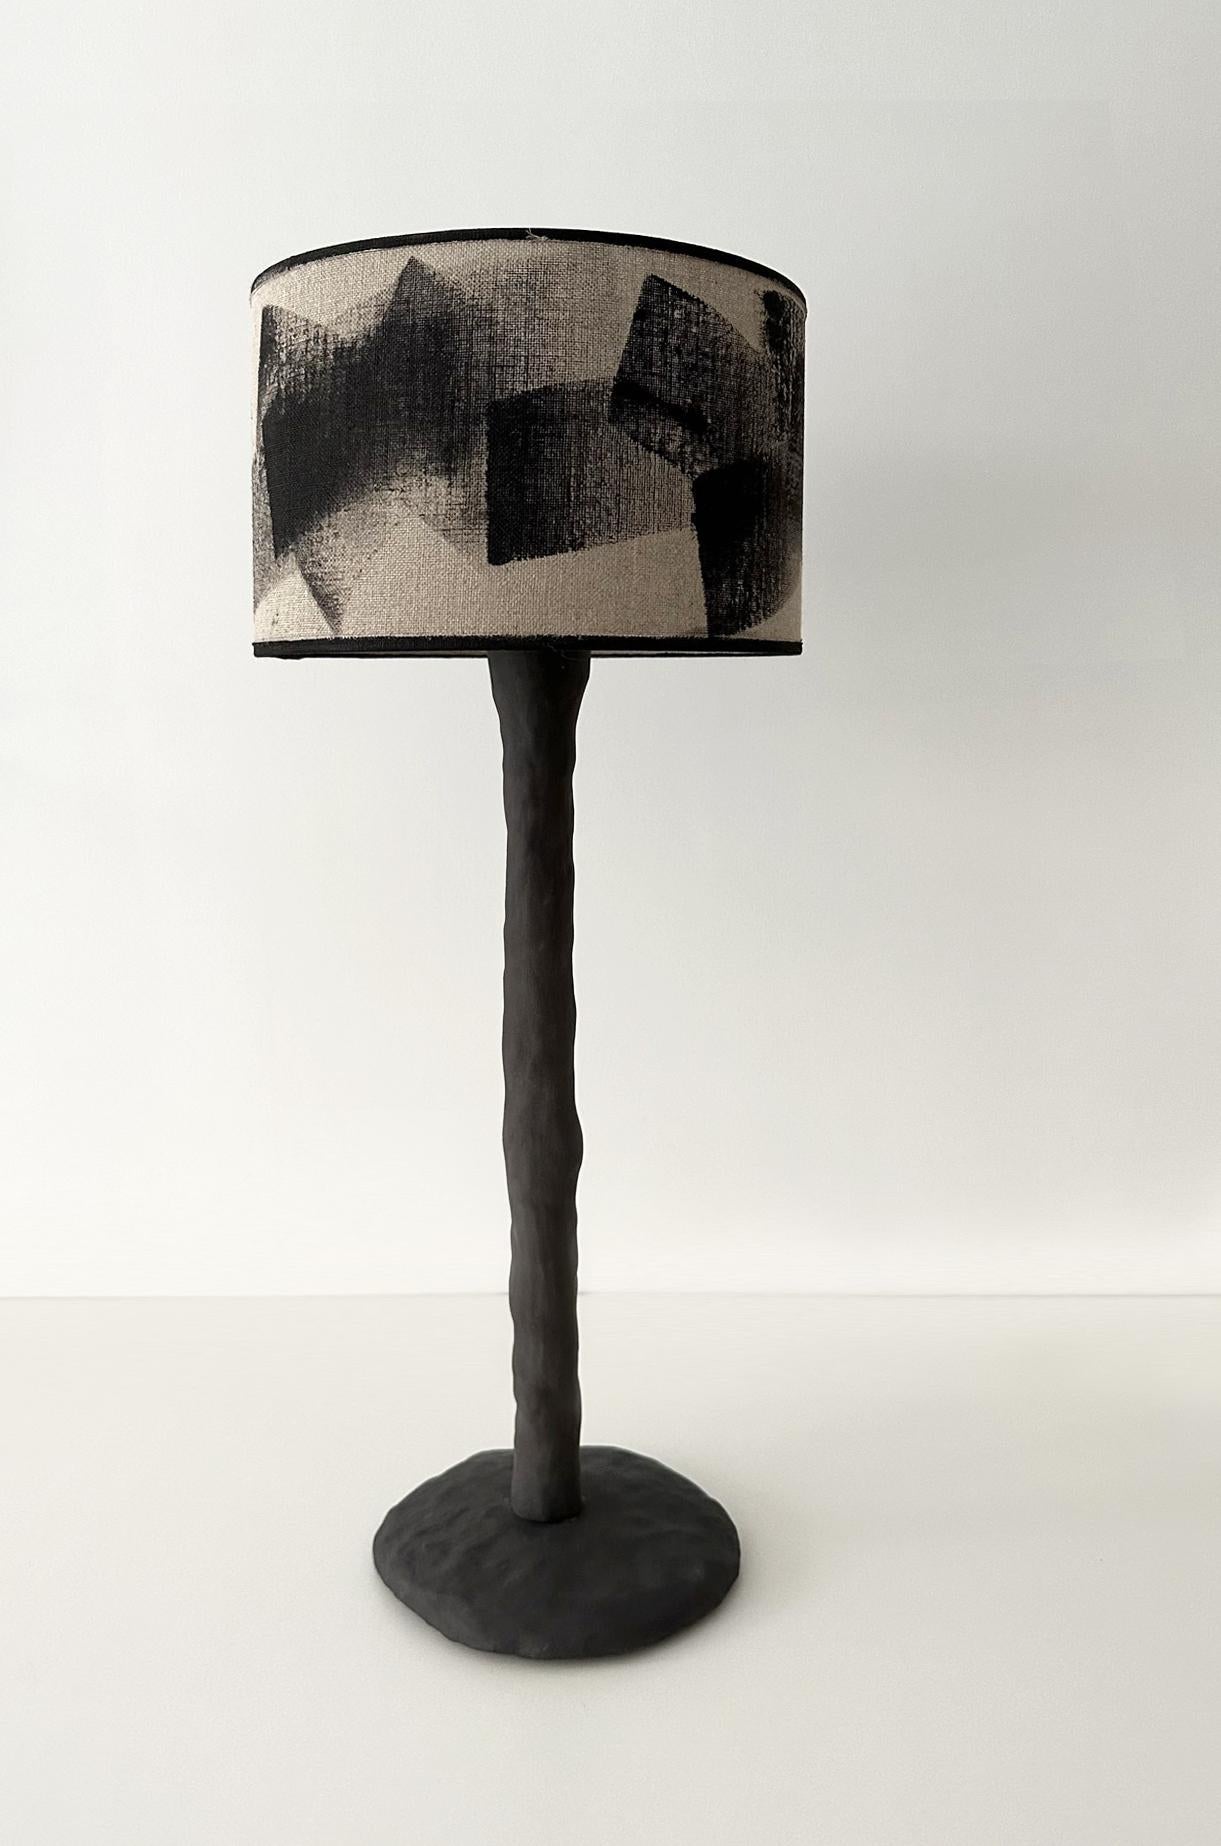 Abstract Wood table lamp by Atelier Monochrome
One of a kind.
Materials: Ceramic / Sandstone.
Dimensions: D 17 x H 60 cm

All our lamps can be wired according to each country. If sold to the USA it will be wired for the USA for